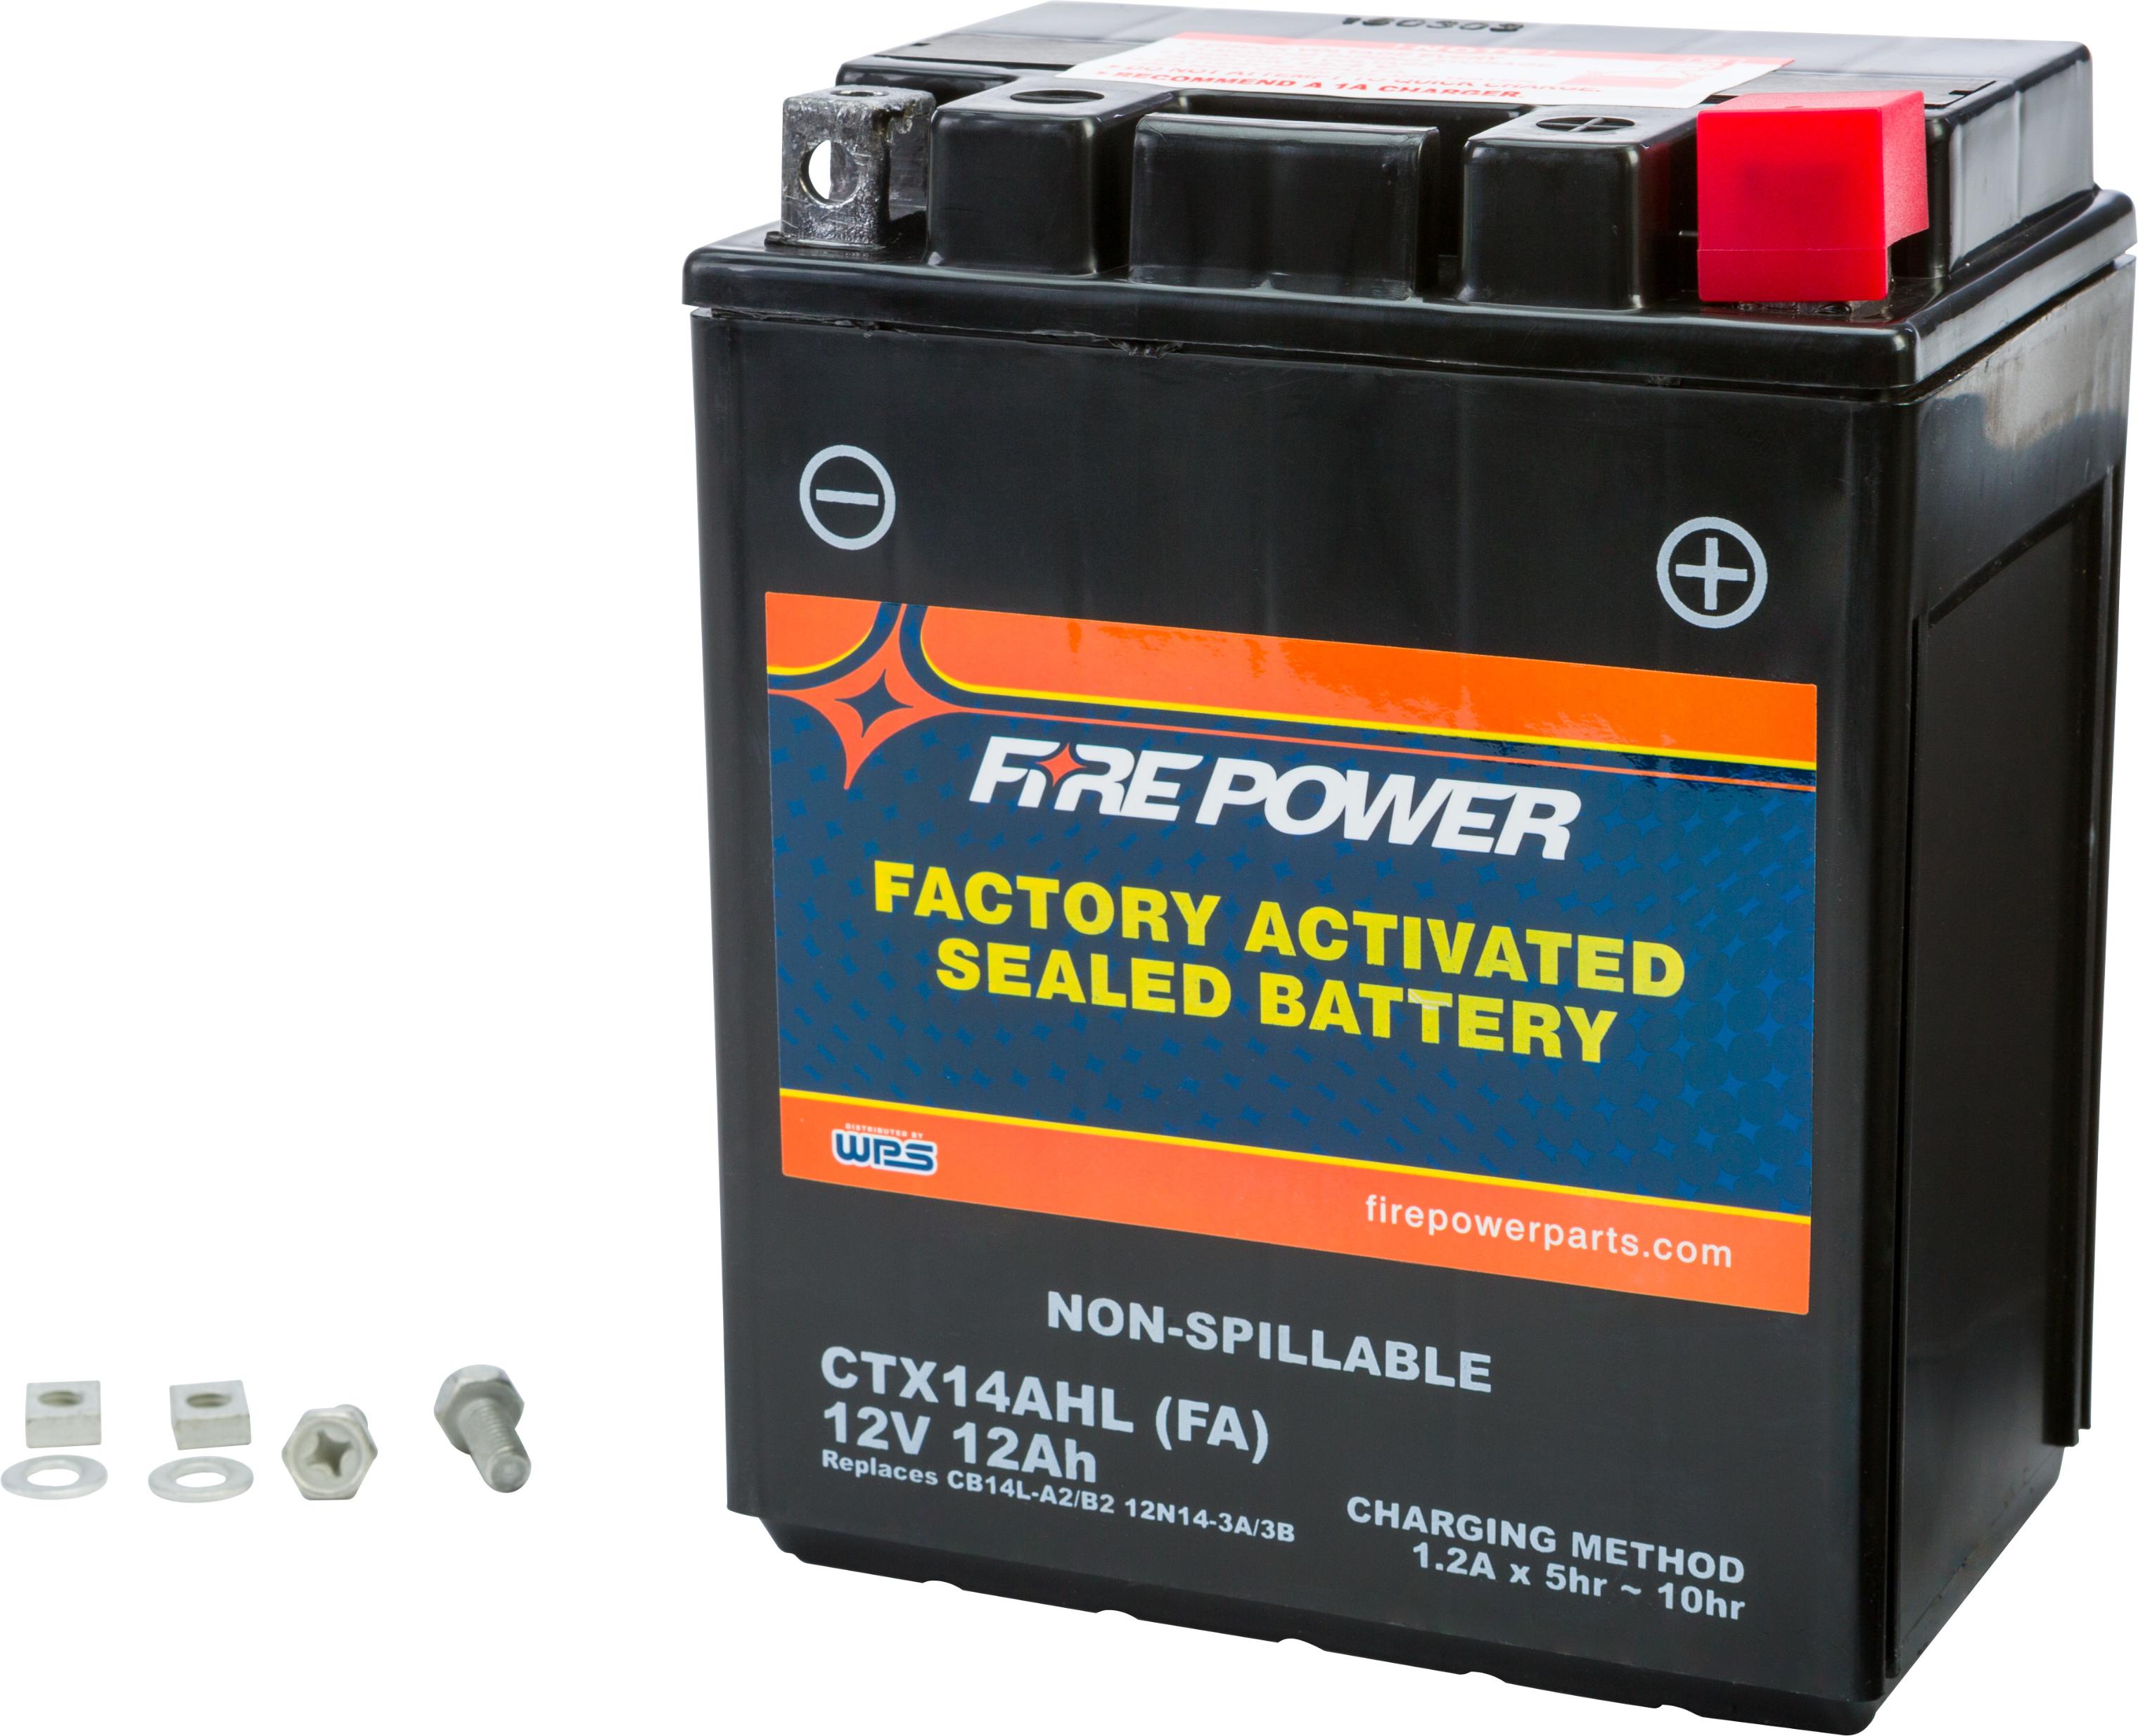 Fire Power - Battery Ctx14ahl/cb14l-a2 Sealed Factory Activated - CTX14AHL-BS(FA)